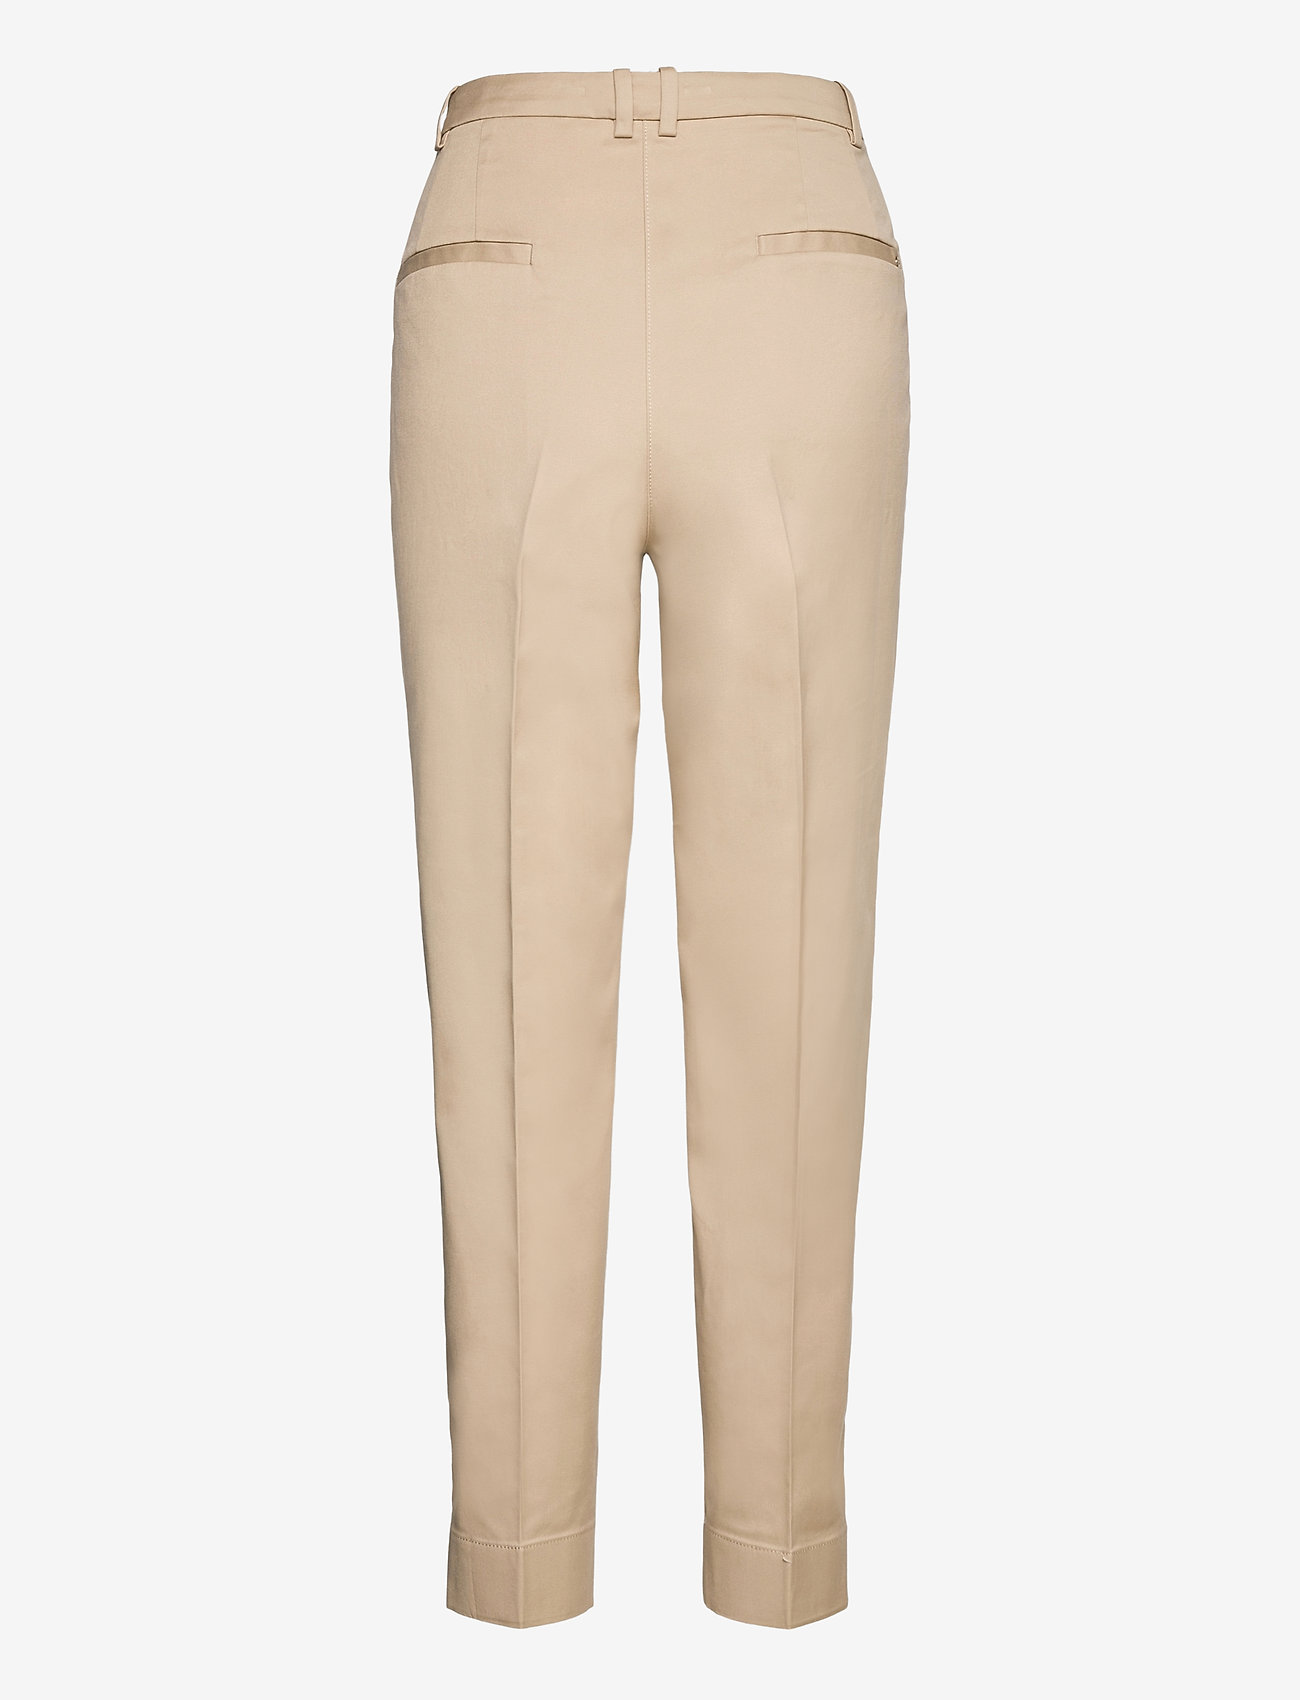 Esprit Collection - Business chinos made of stretch cotton - spodnie proste - sand - 1